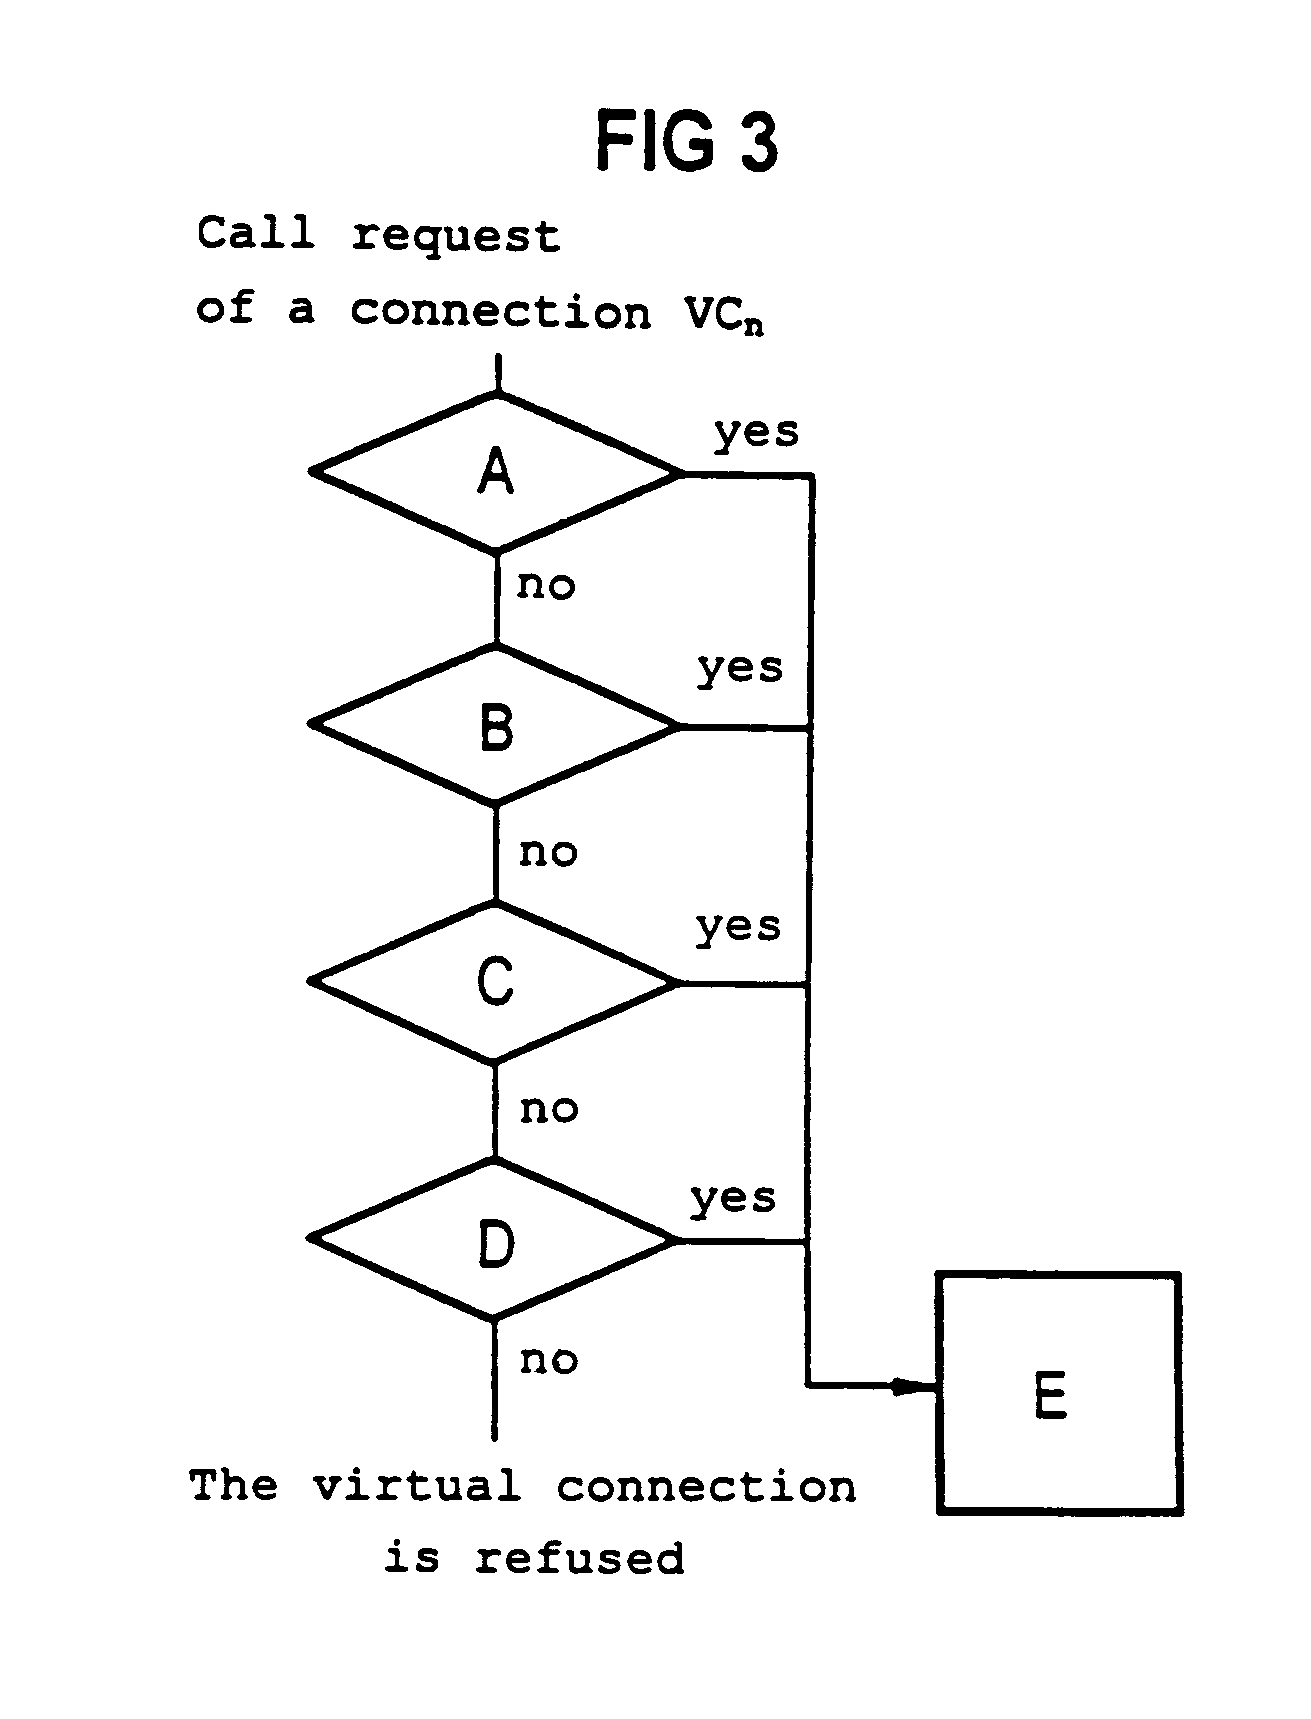 Statistic multiplexing of ATM-connections